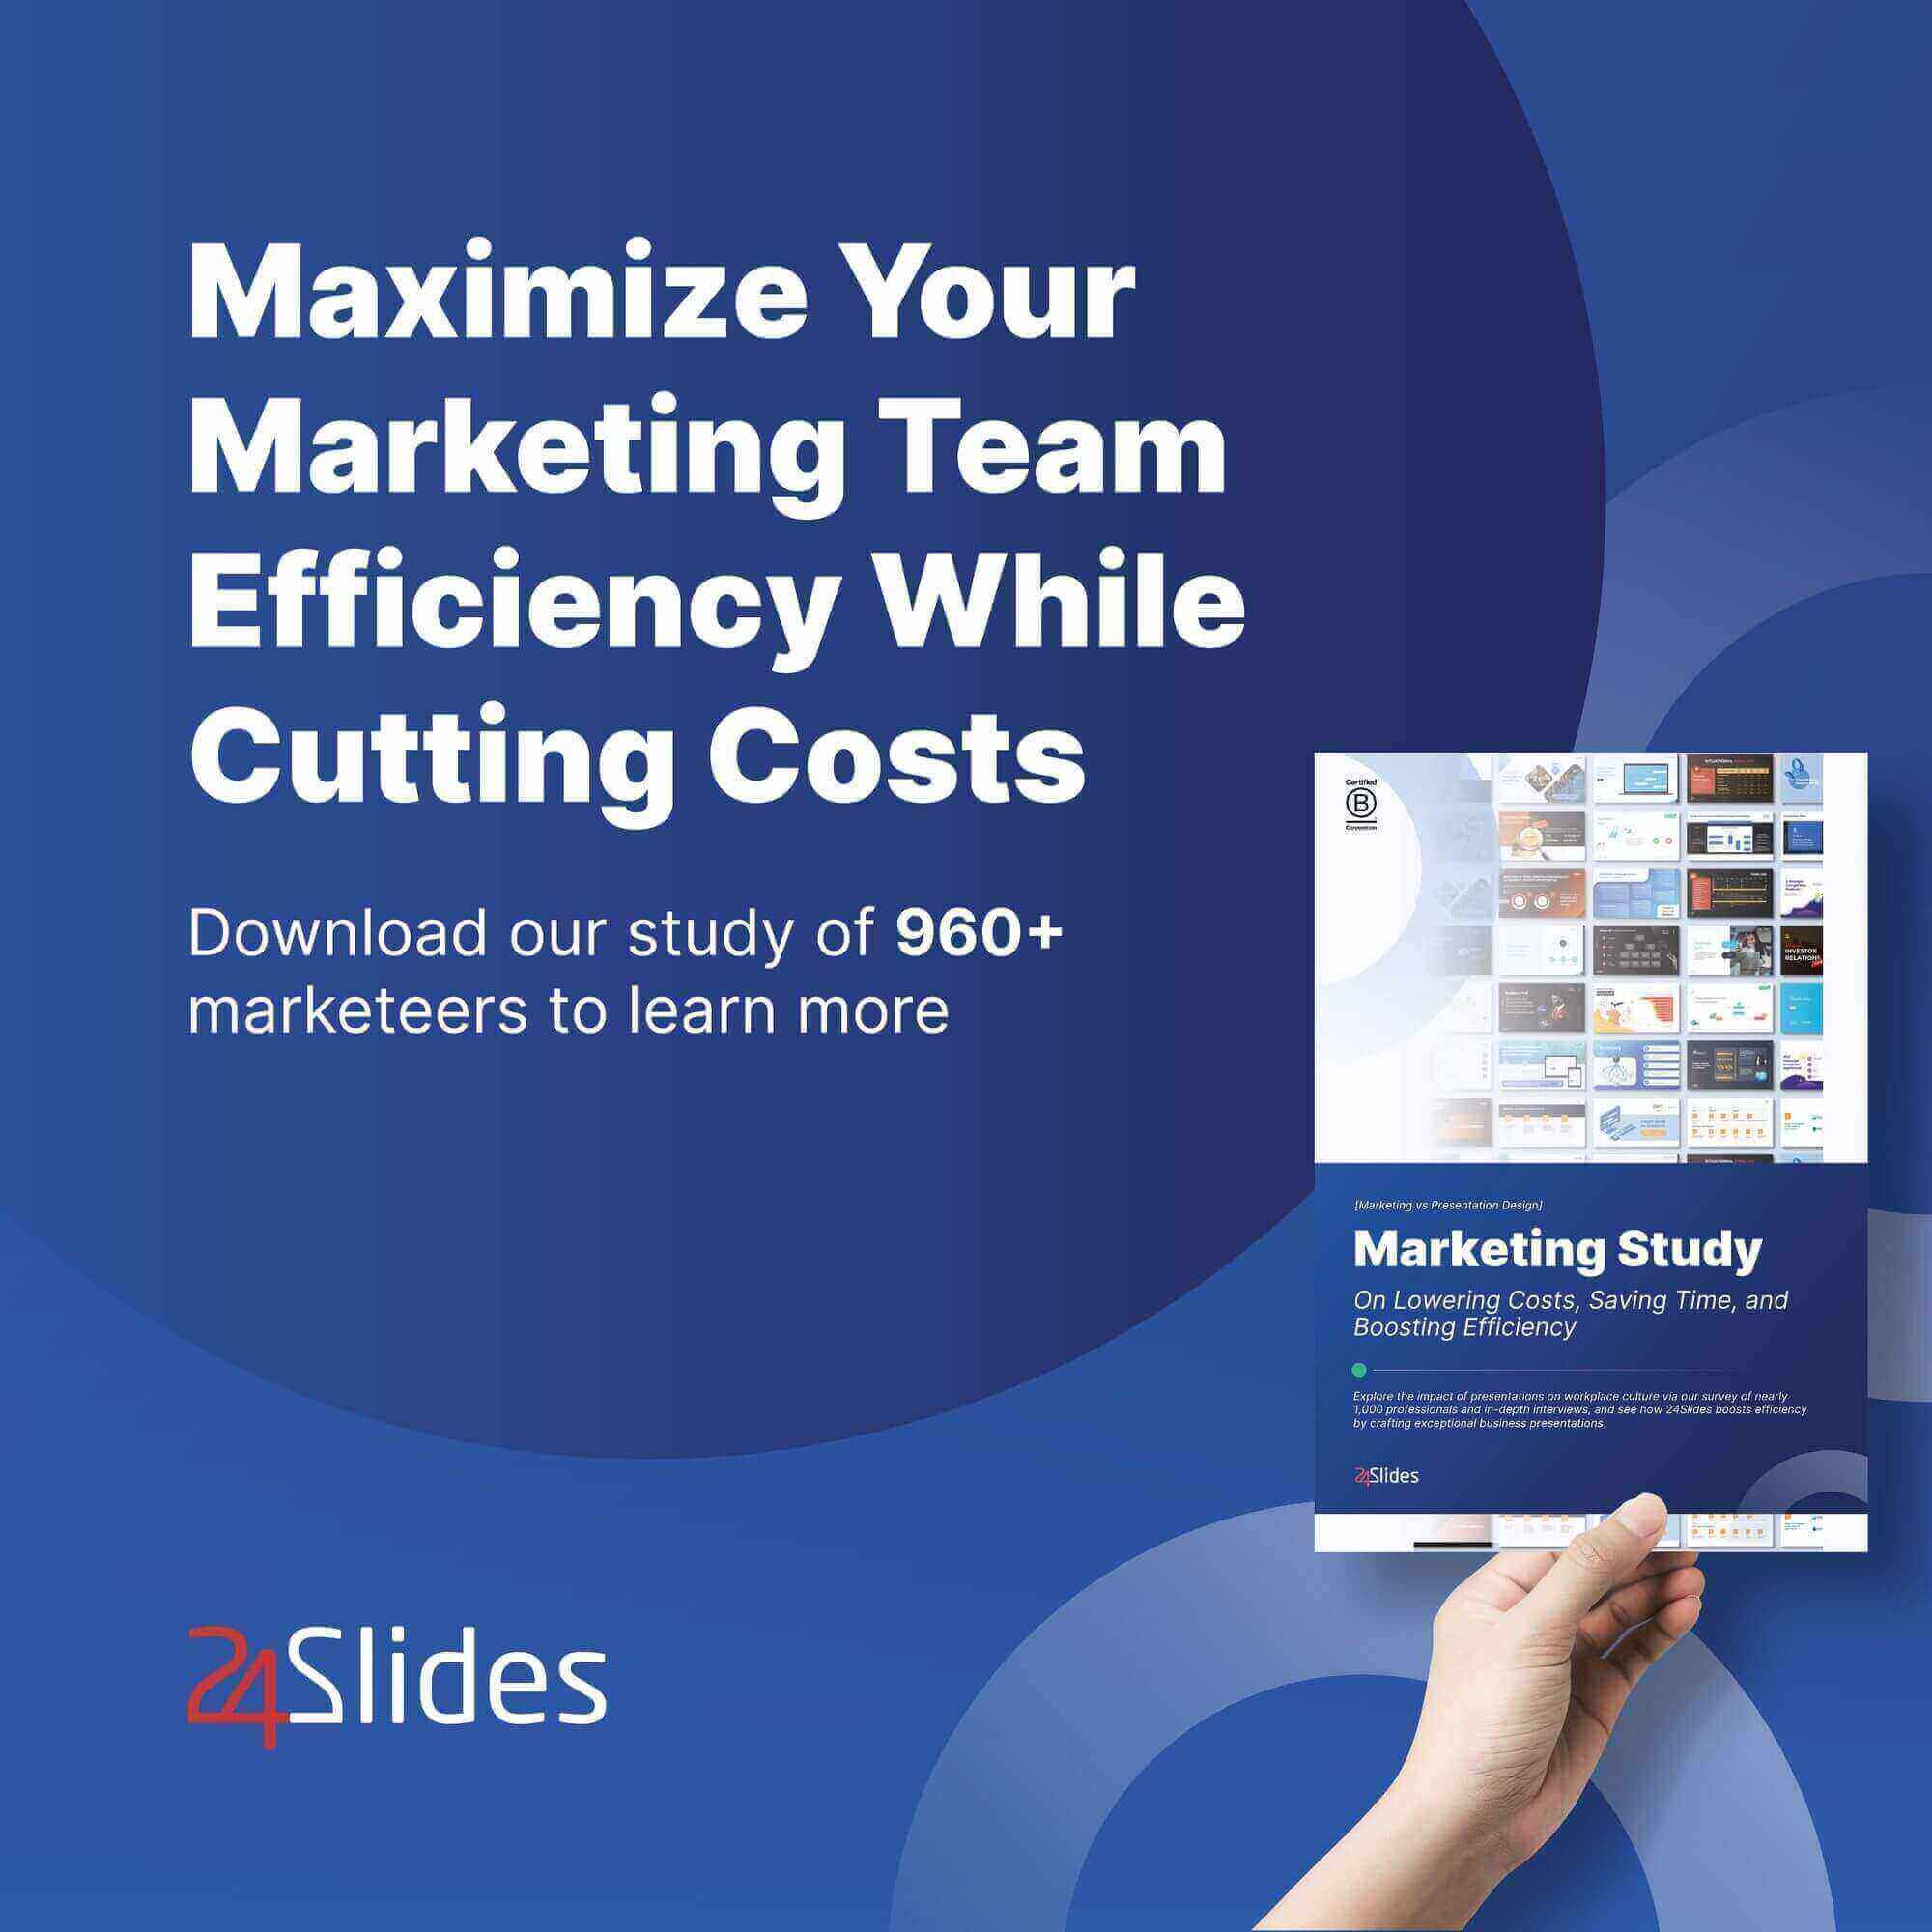 Marketing Study: Maximize your marketing team while cutting costs